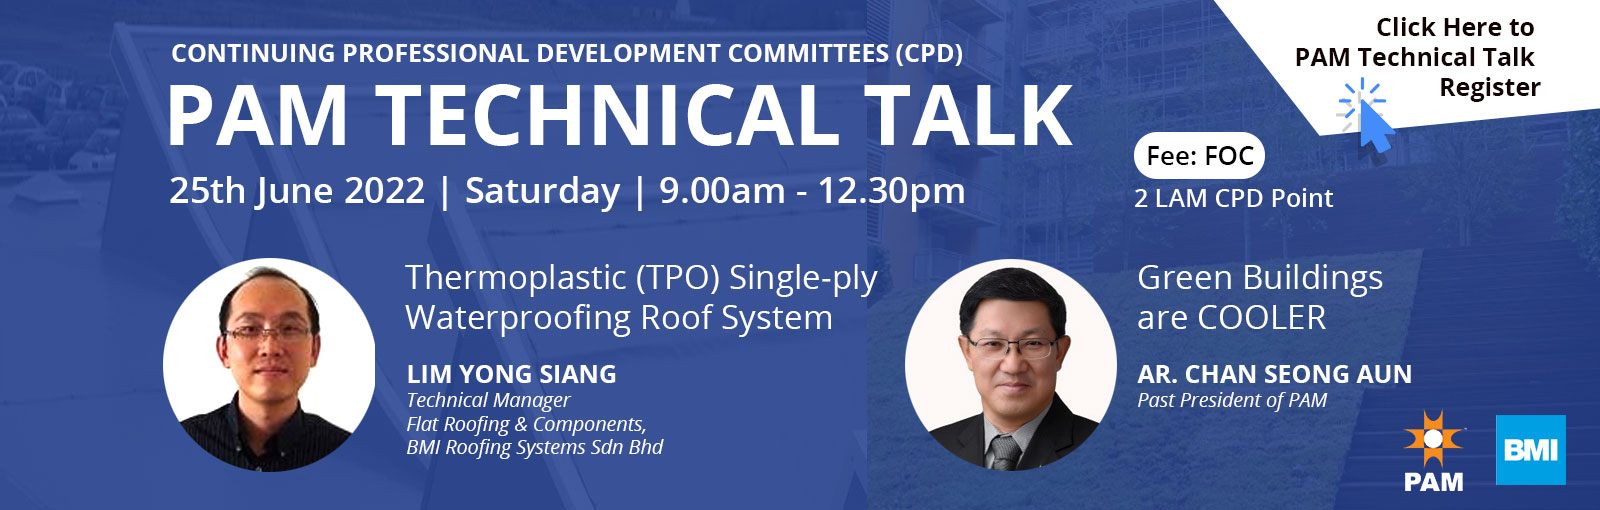 PAM Technical Talk : Thermoplastic (TPO) Single-ply Waterproofing Roof System & Green Buildings are COOLER